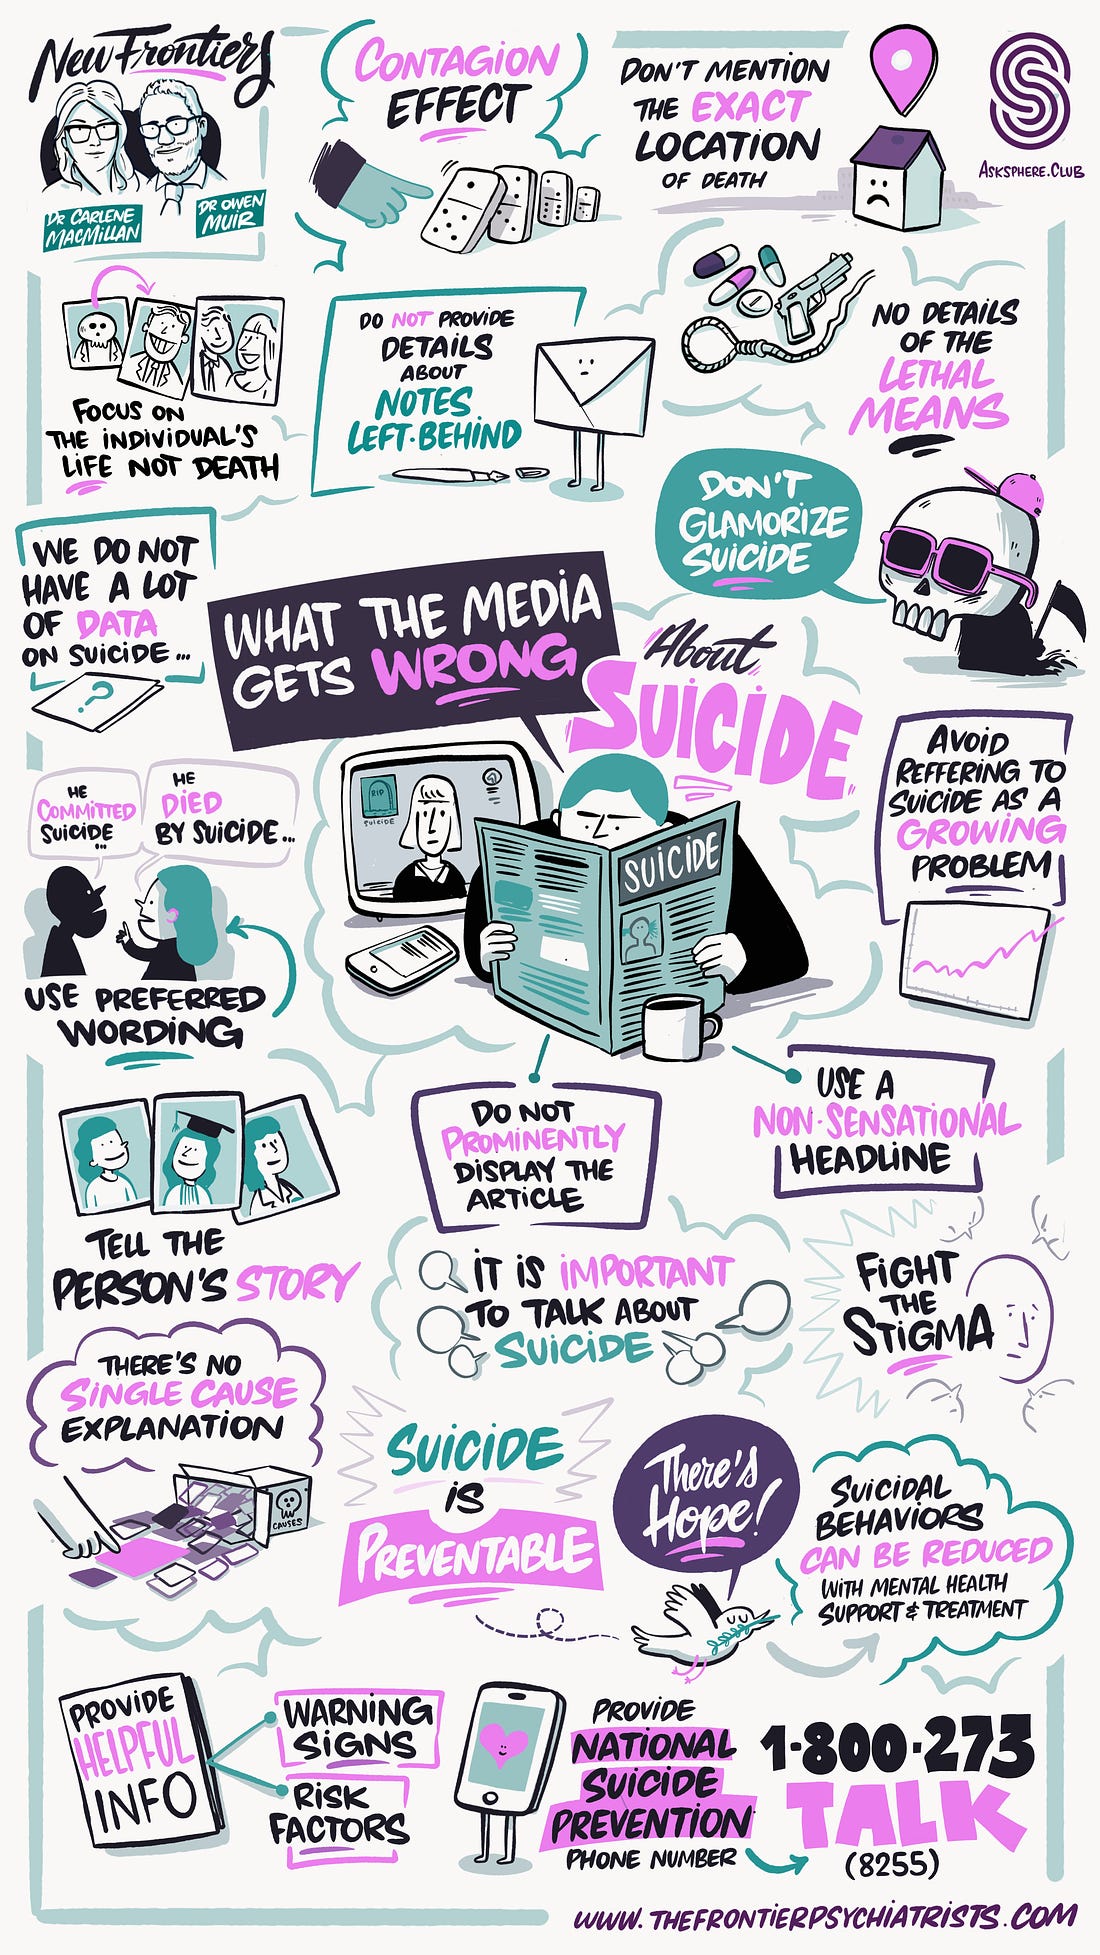 sketchnote in purple and teal with tips about how to report on suicide